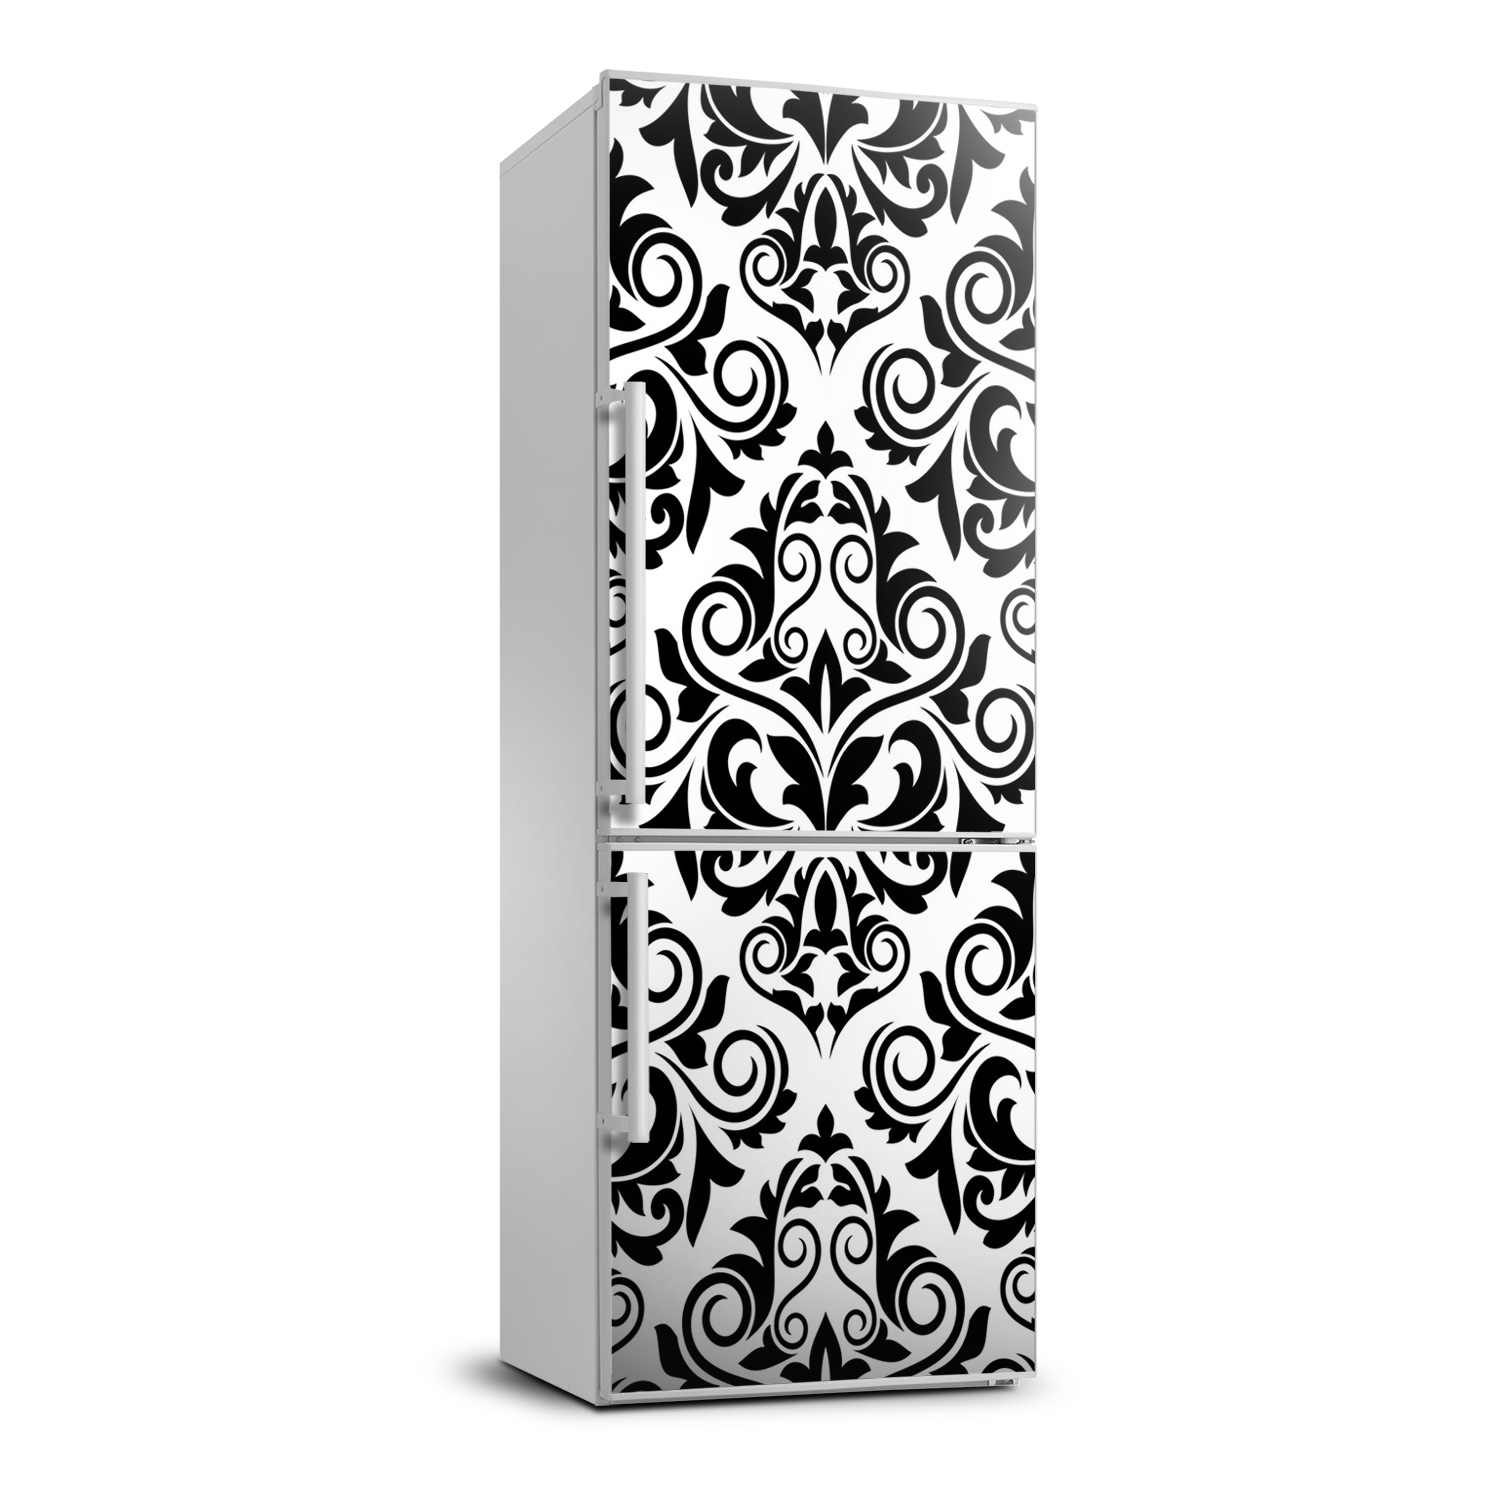 Magnet Sticker Refrigerator Wall wrap removable Peel /& Stick Decal Brick wall